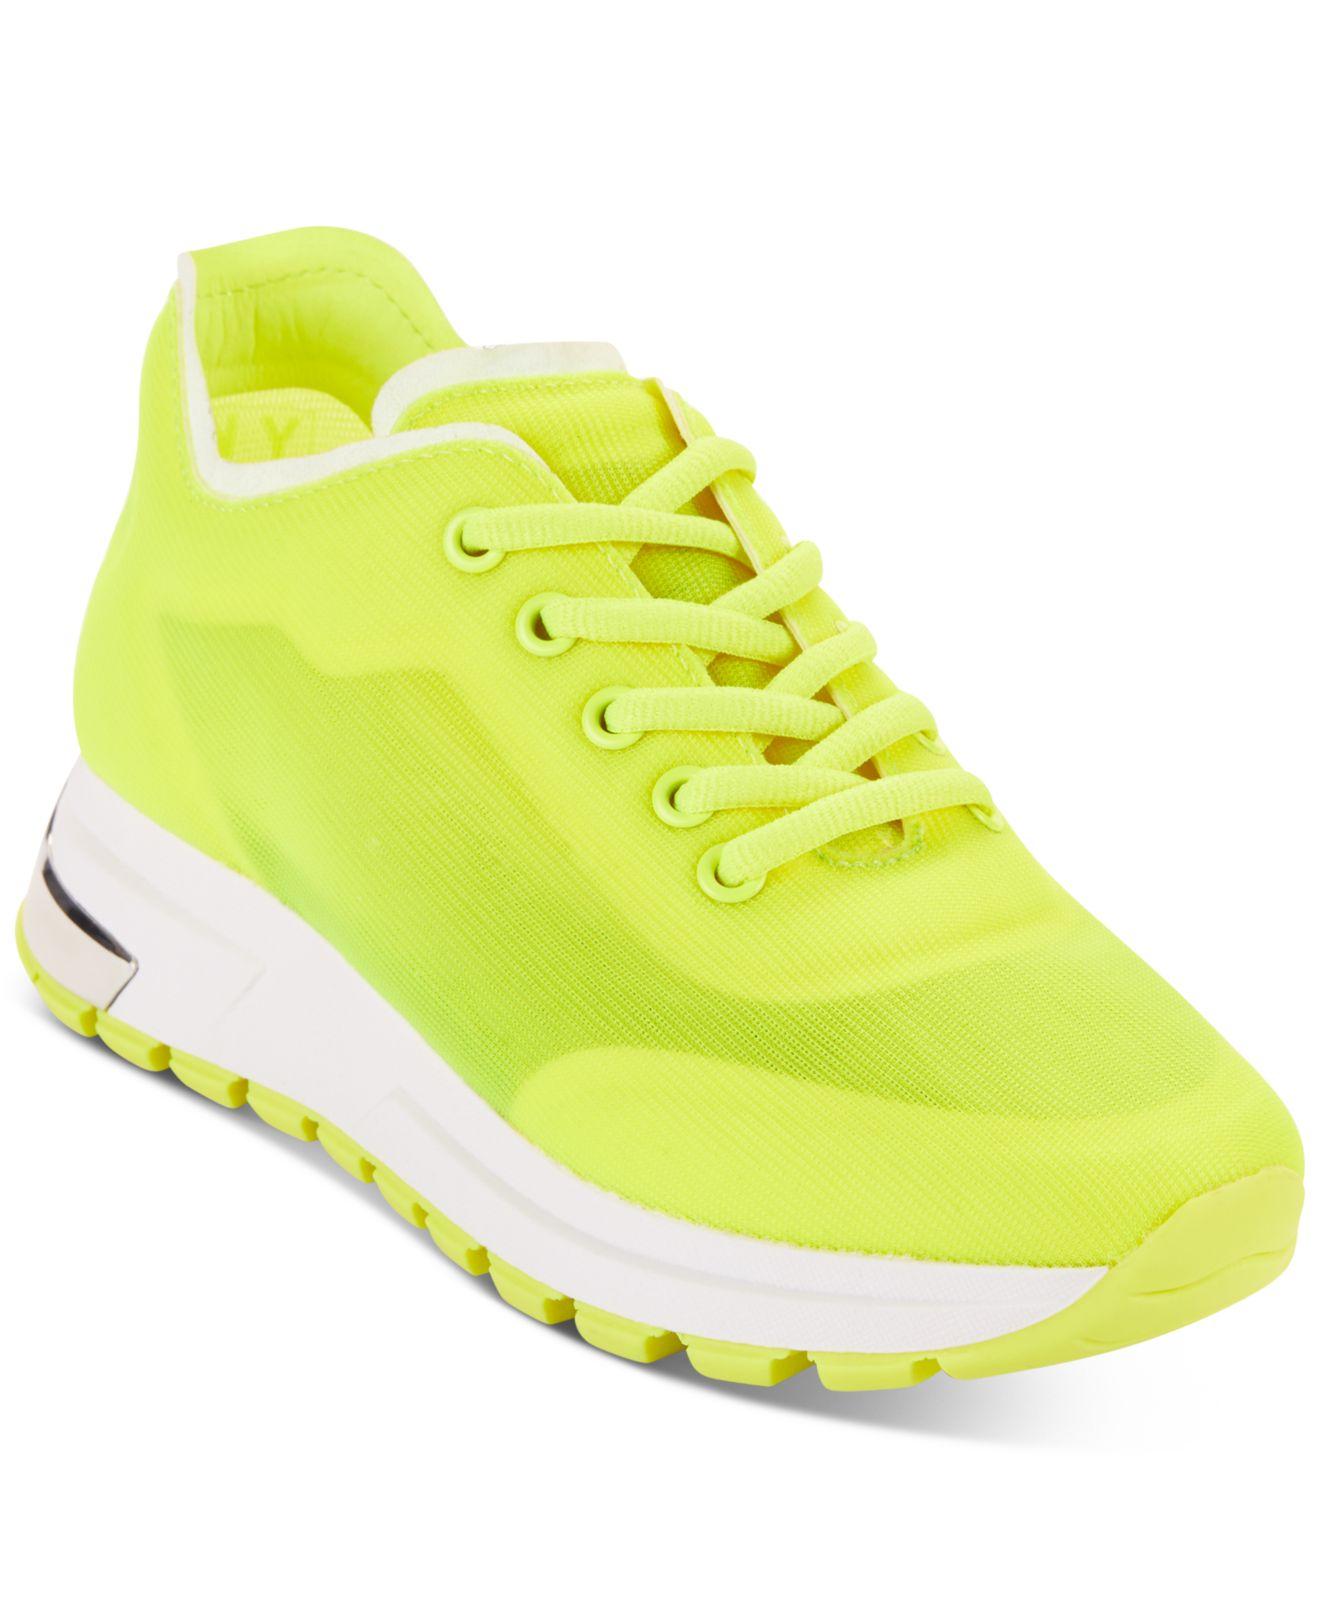 DKNY Mak Lace Up Sneakers in Green | Lyst